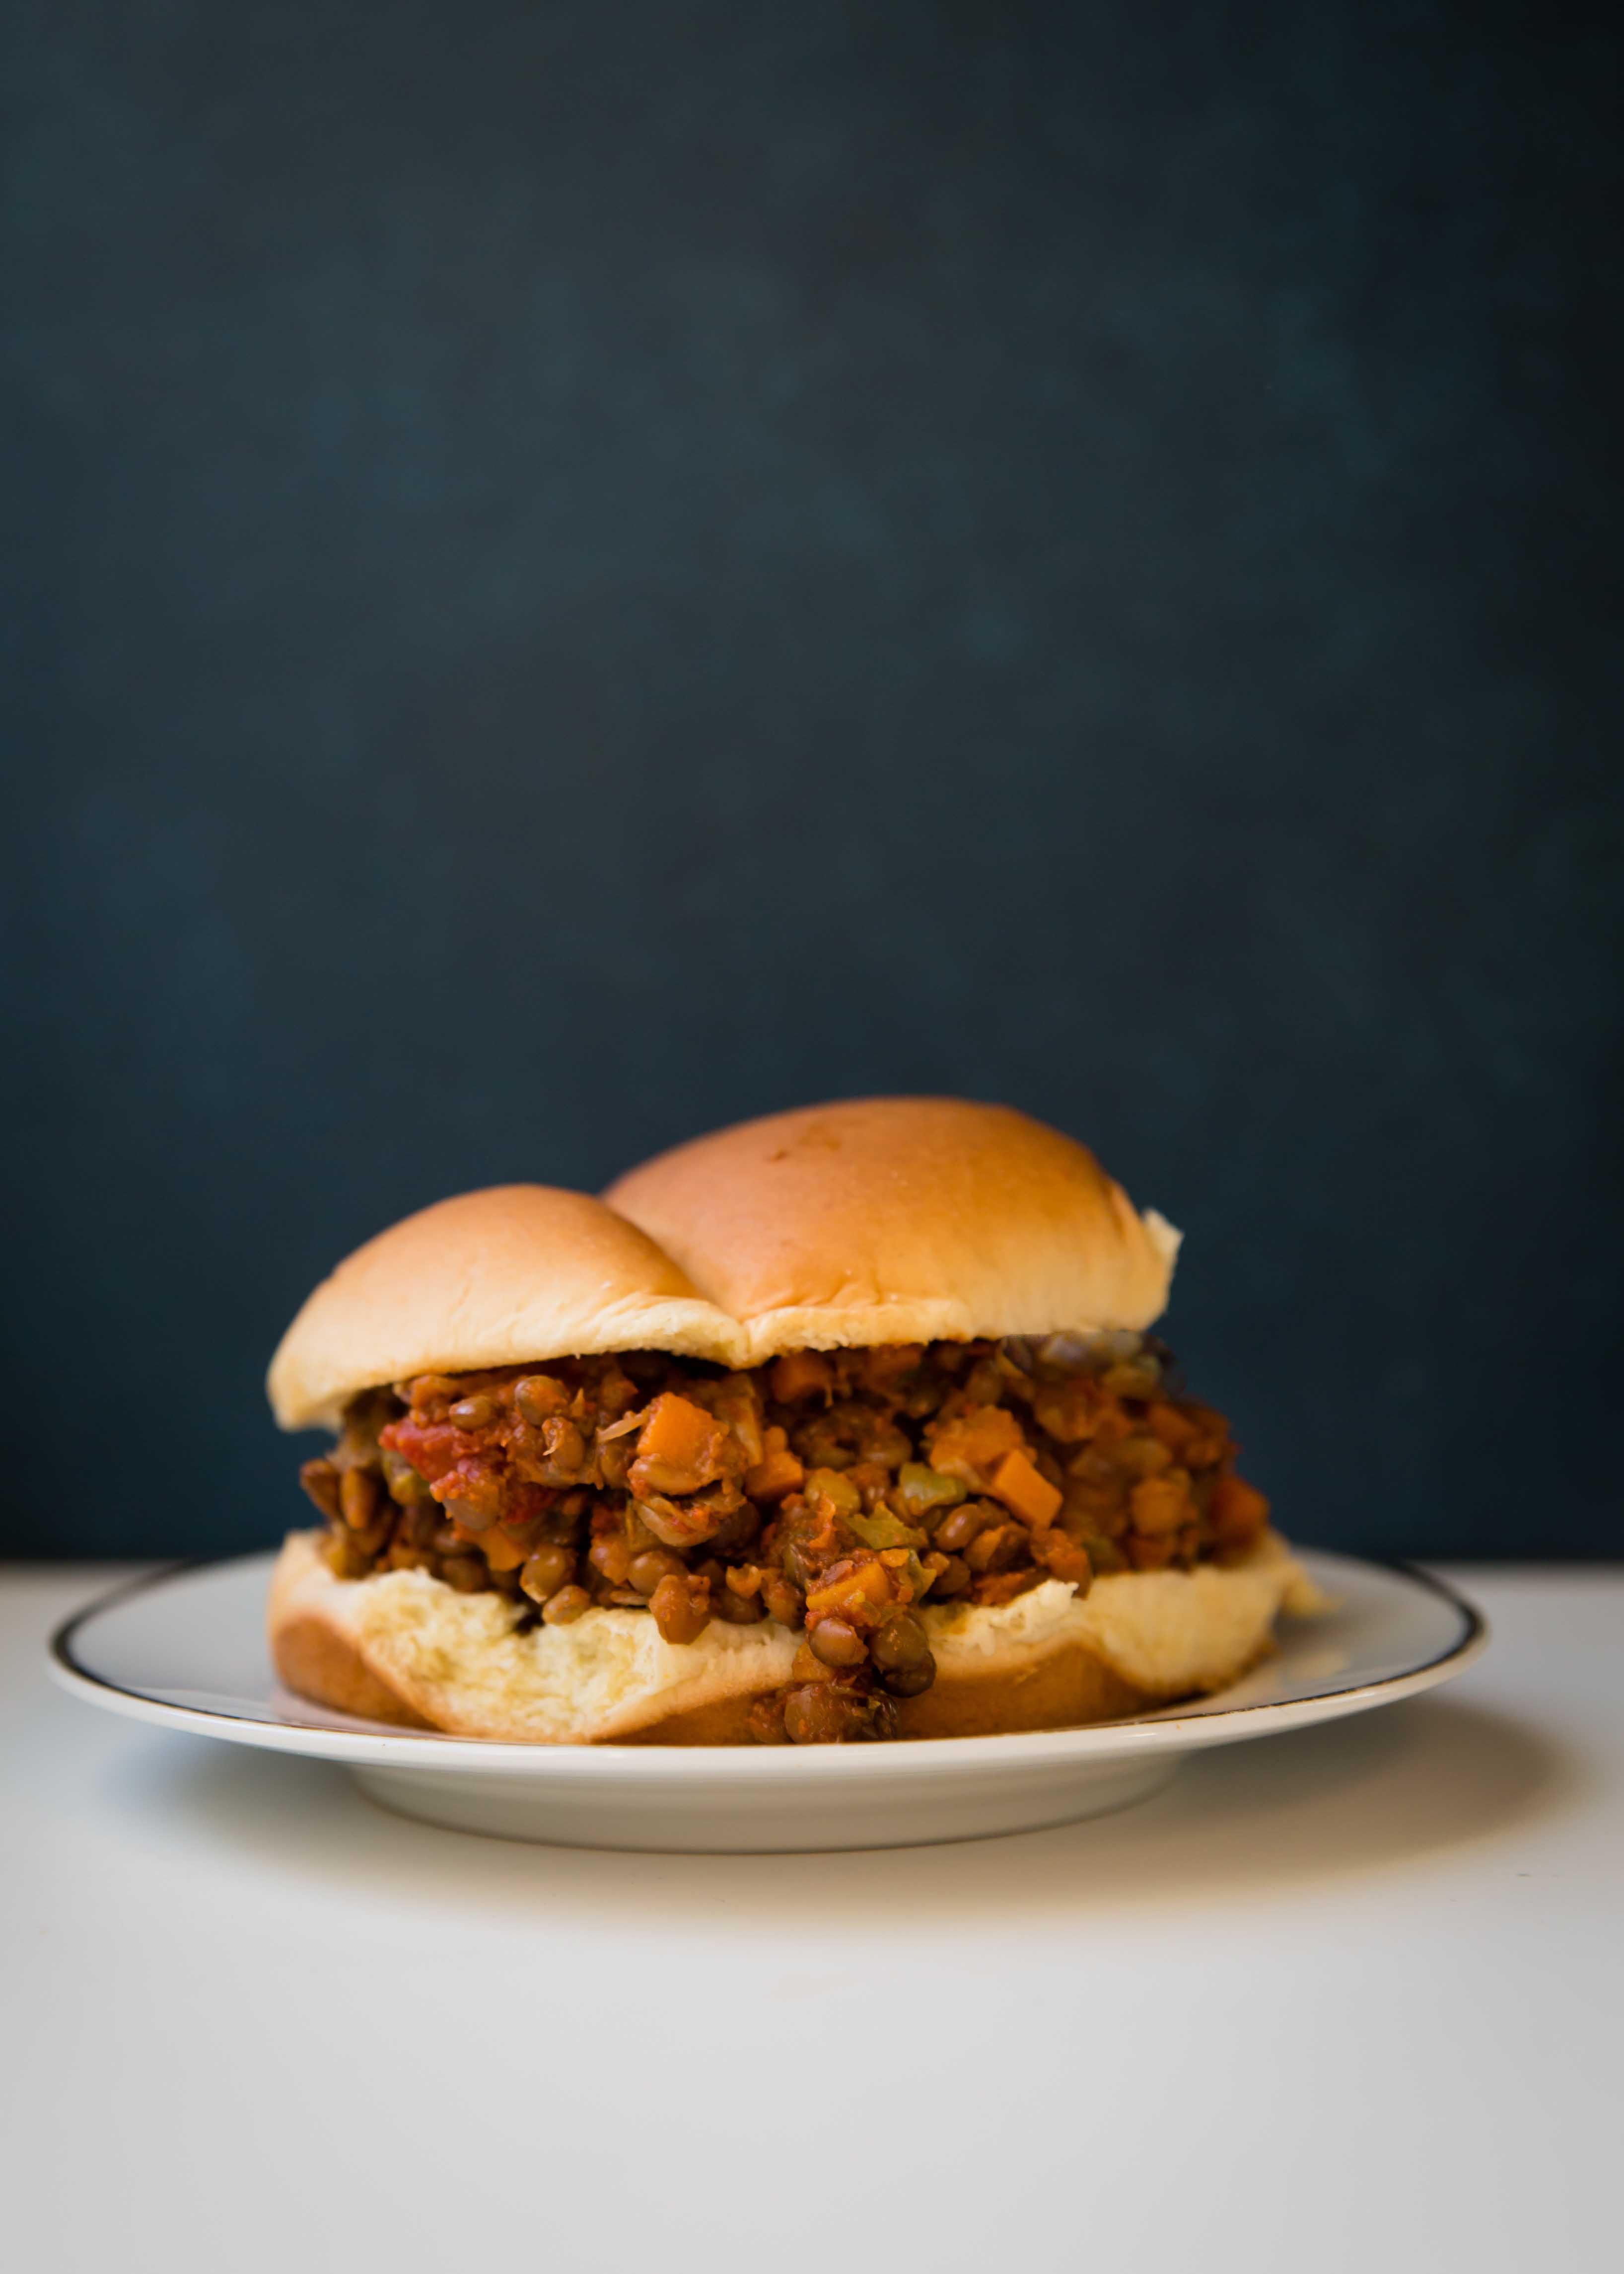 Trying to eat plant-based is easy when you've got a lentil sloppy joe waiting for you.